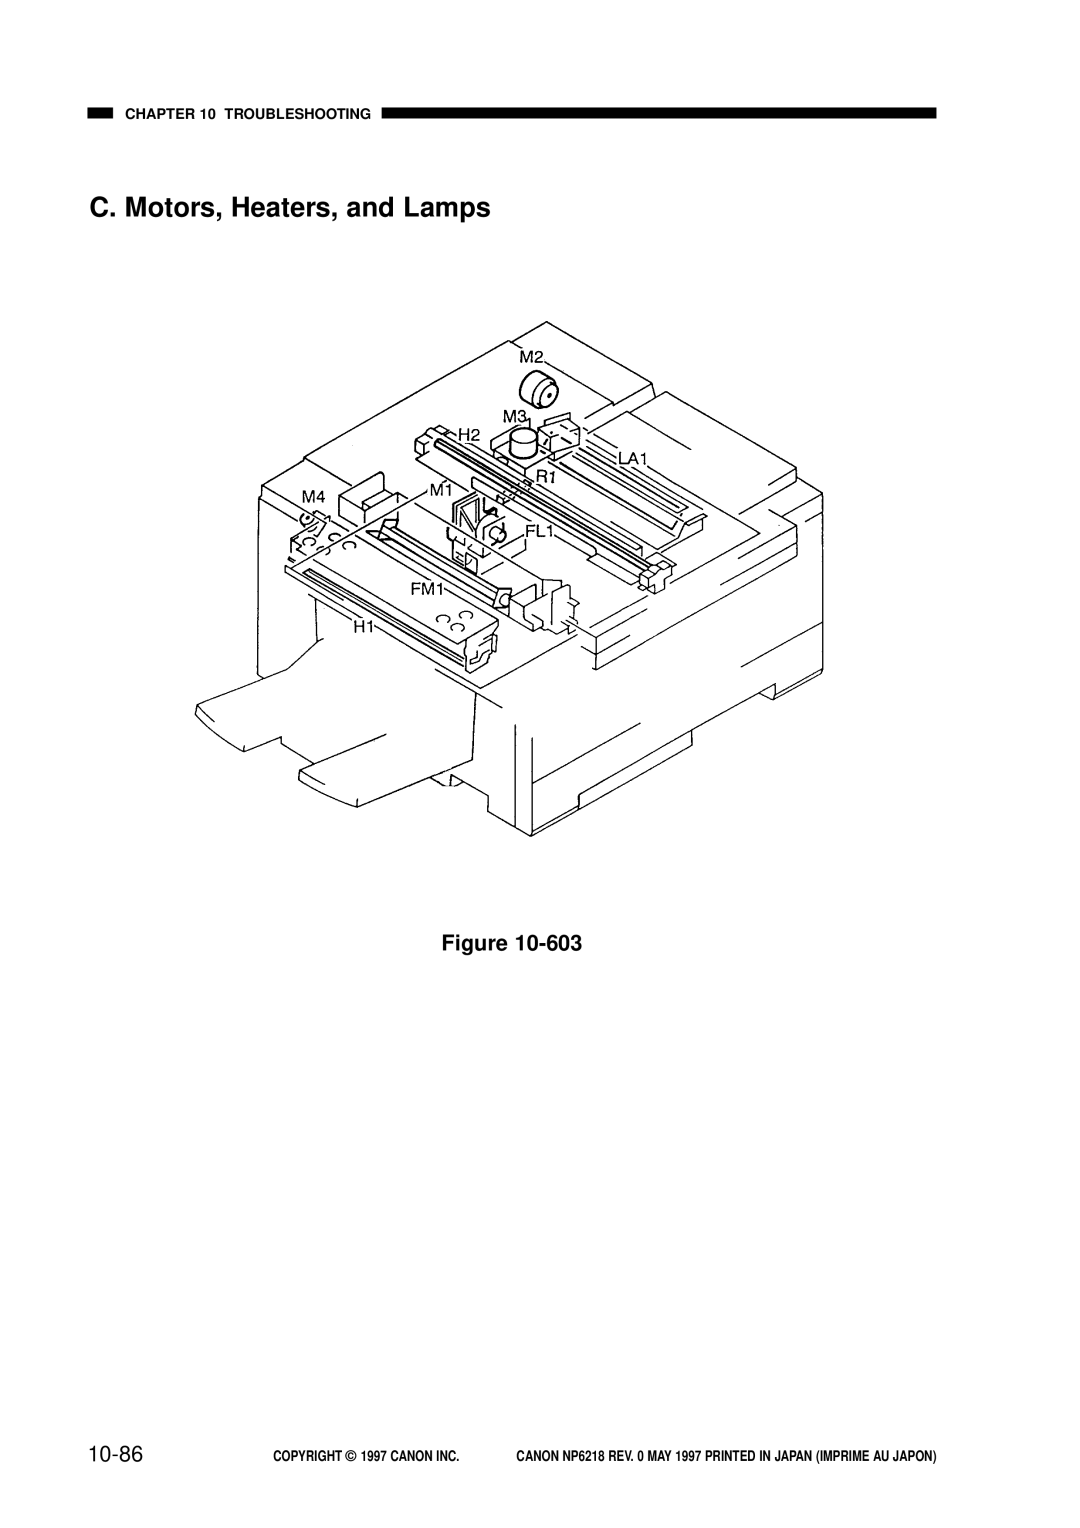 Canon NP6218, FY8-13EX-000 service manual C. Motors, Heaters, and Lamps, 10-86, Troubleshooting, COPYRIGHT 1997 CANON INC 